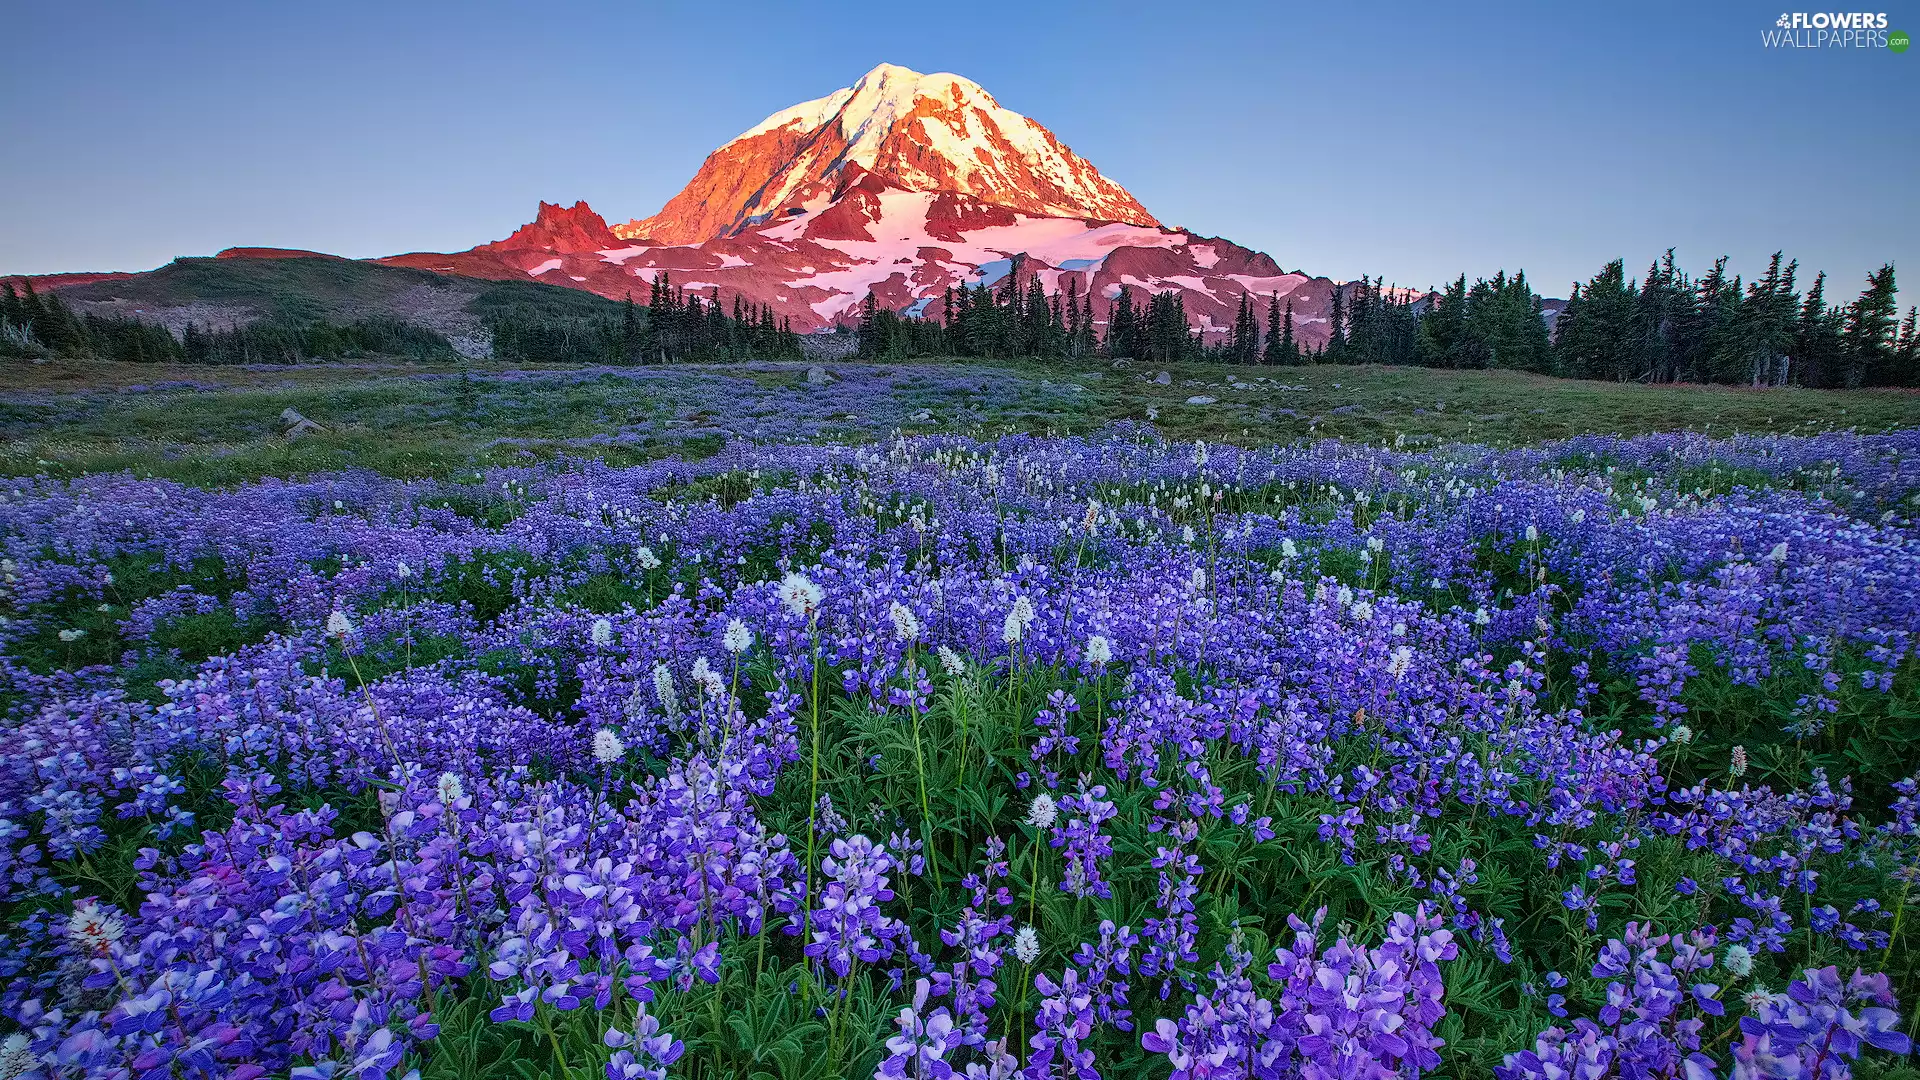 trees, Mountains, viewes, Meadow, Washington State, The United States, lupine, Mount Rainier National Park, Flowers